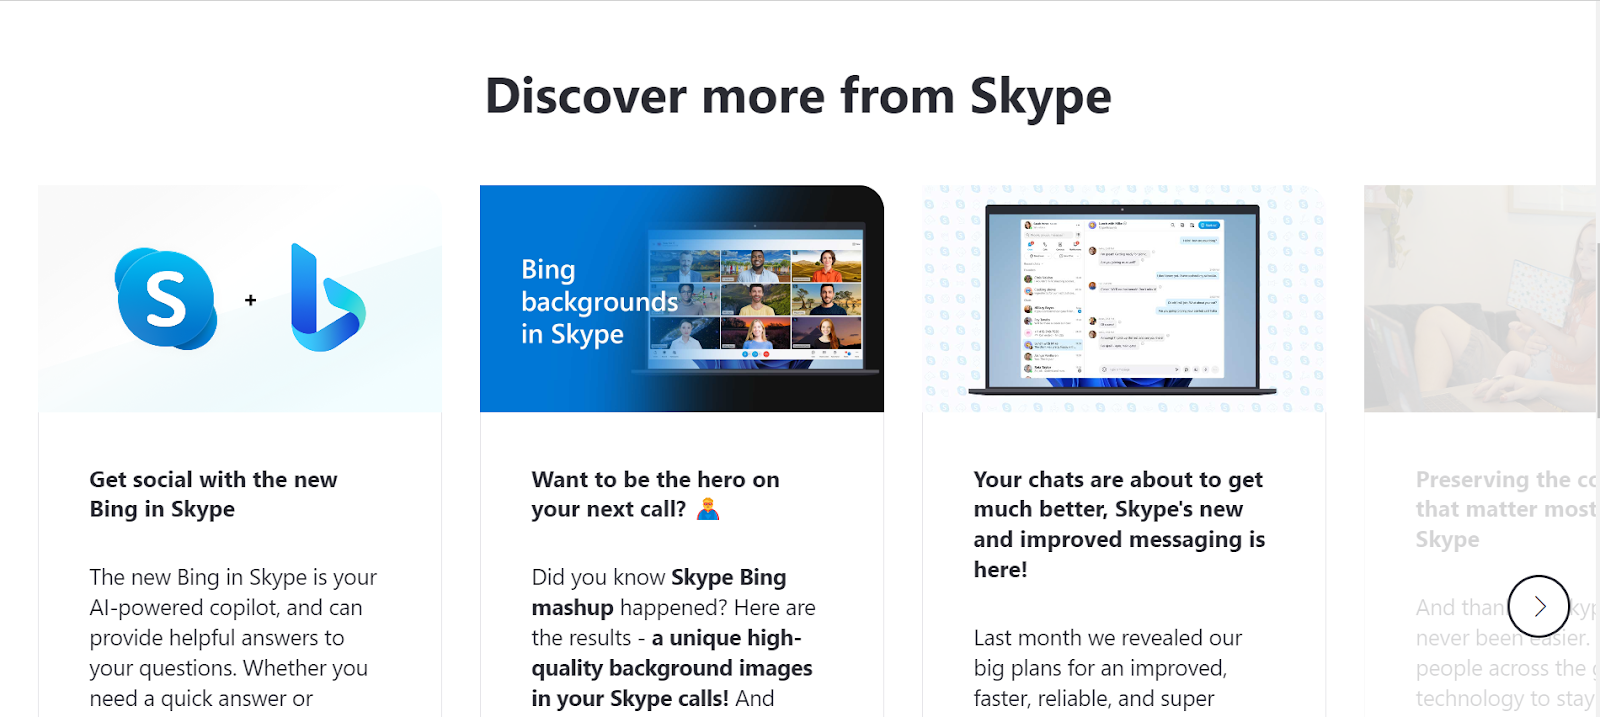 Skype website snapshot highlighting the services it offers.